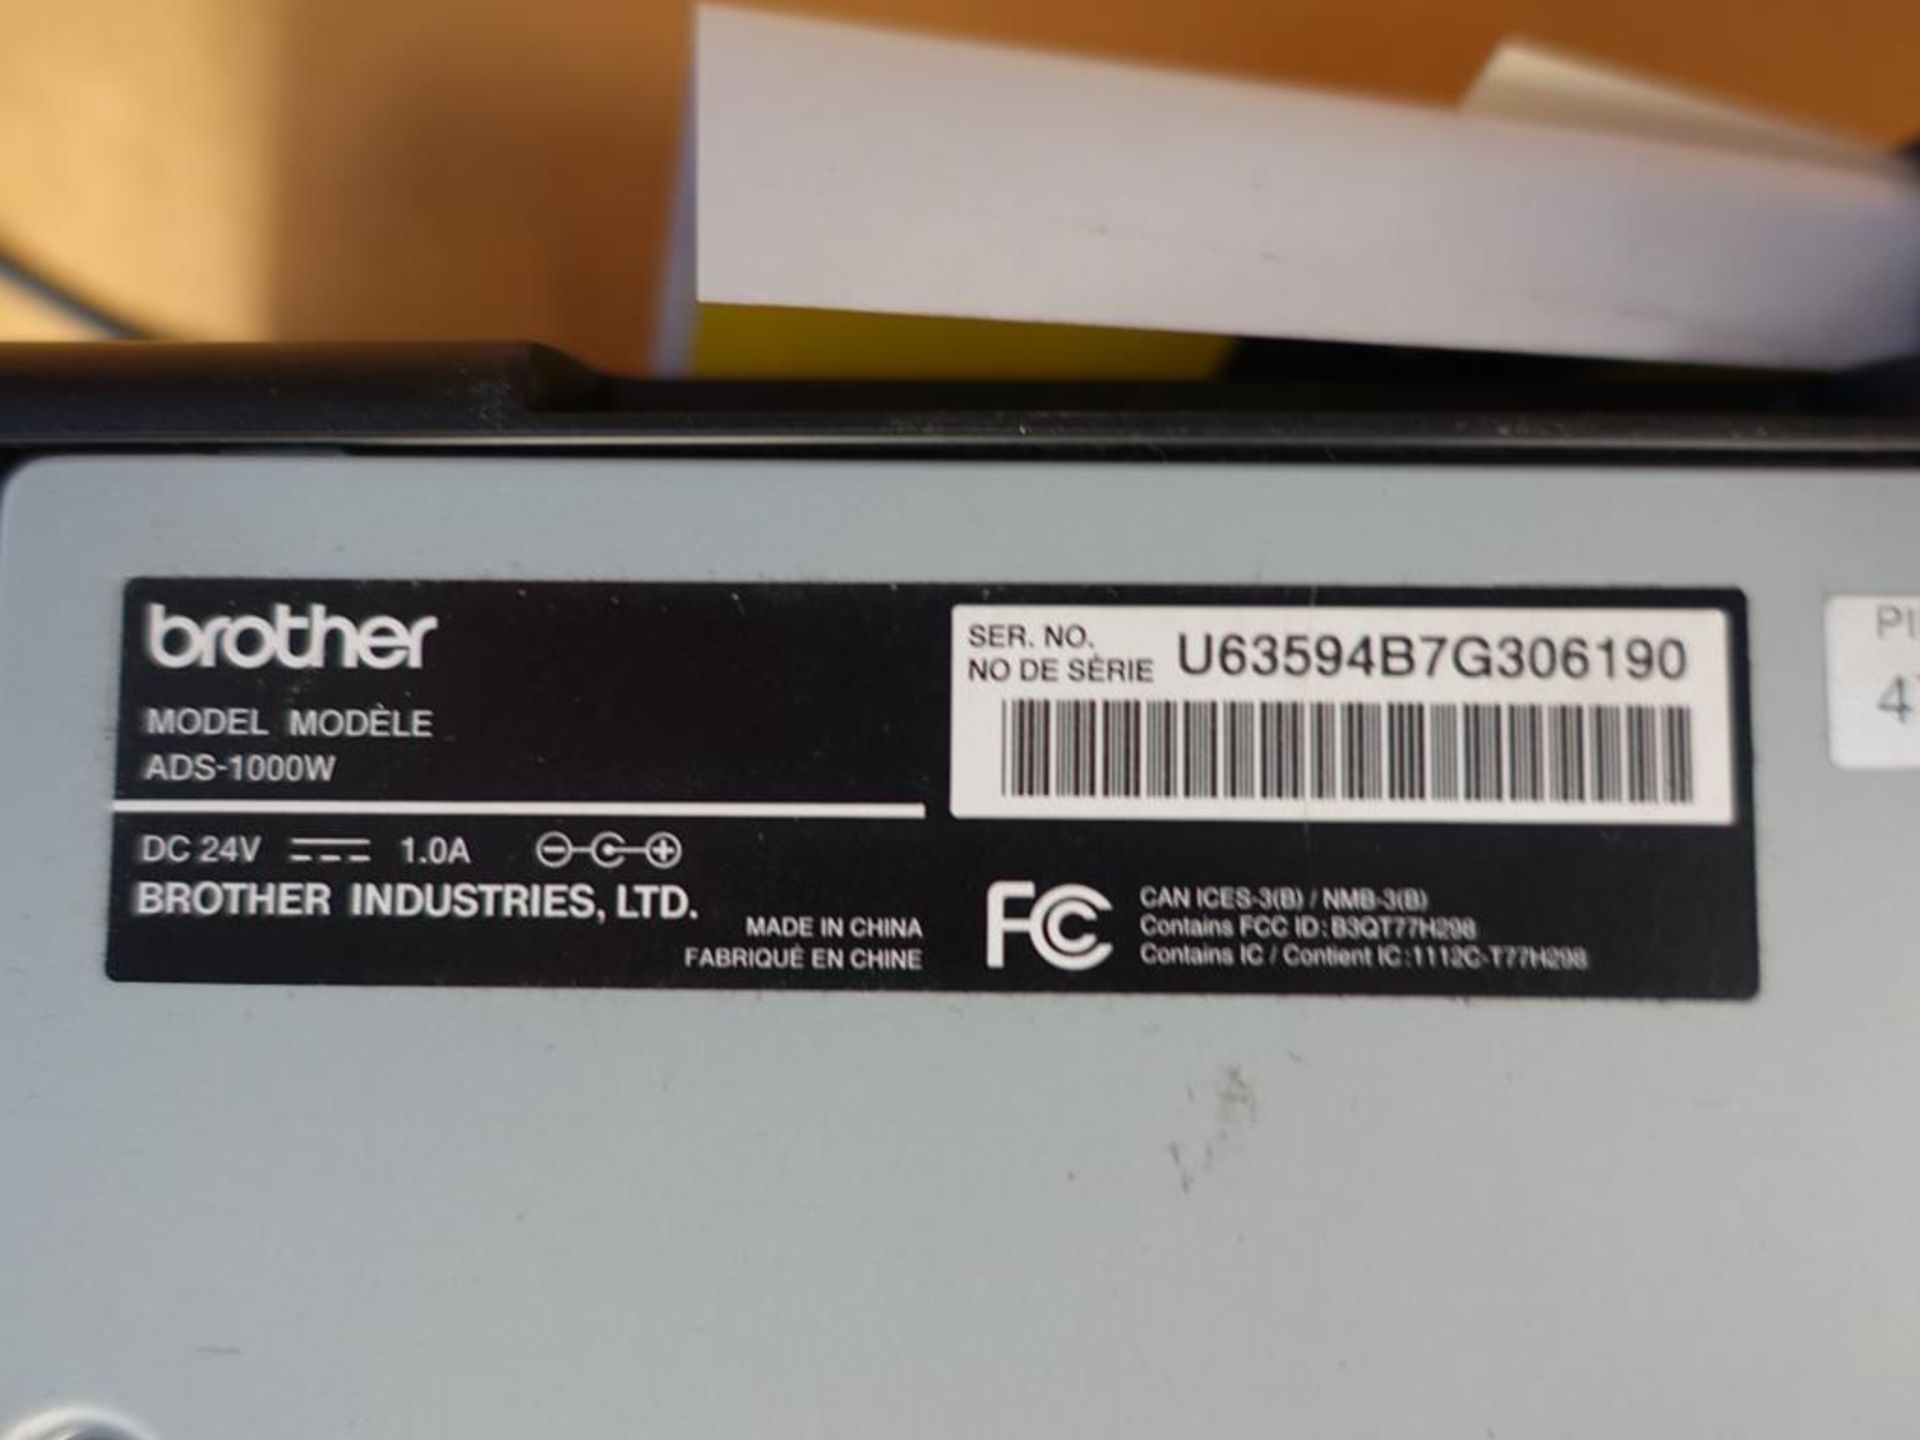 BROTHER, ADS-1000W, PORTABLE, SHEETFED SCANNER, S/N U63594B7G306190 - Image 2 of 2